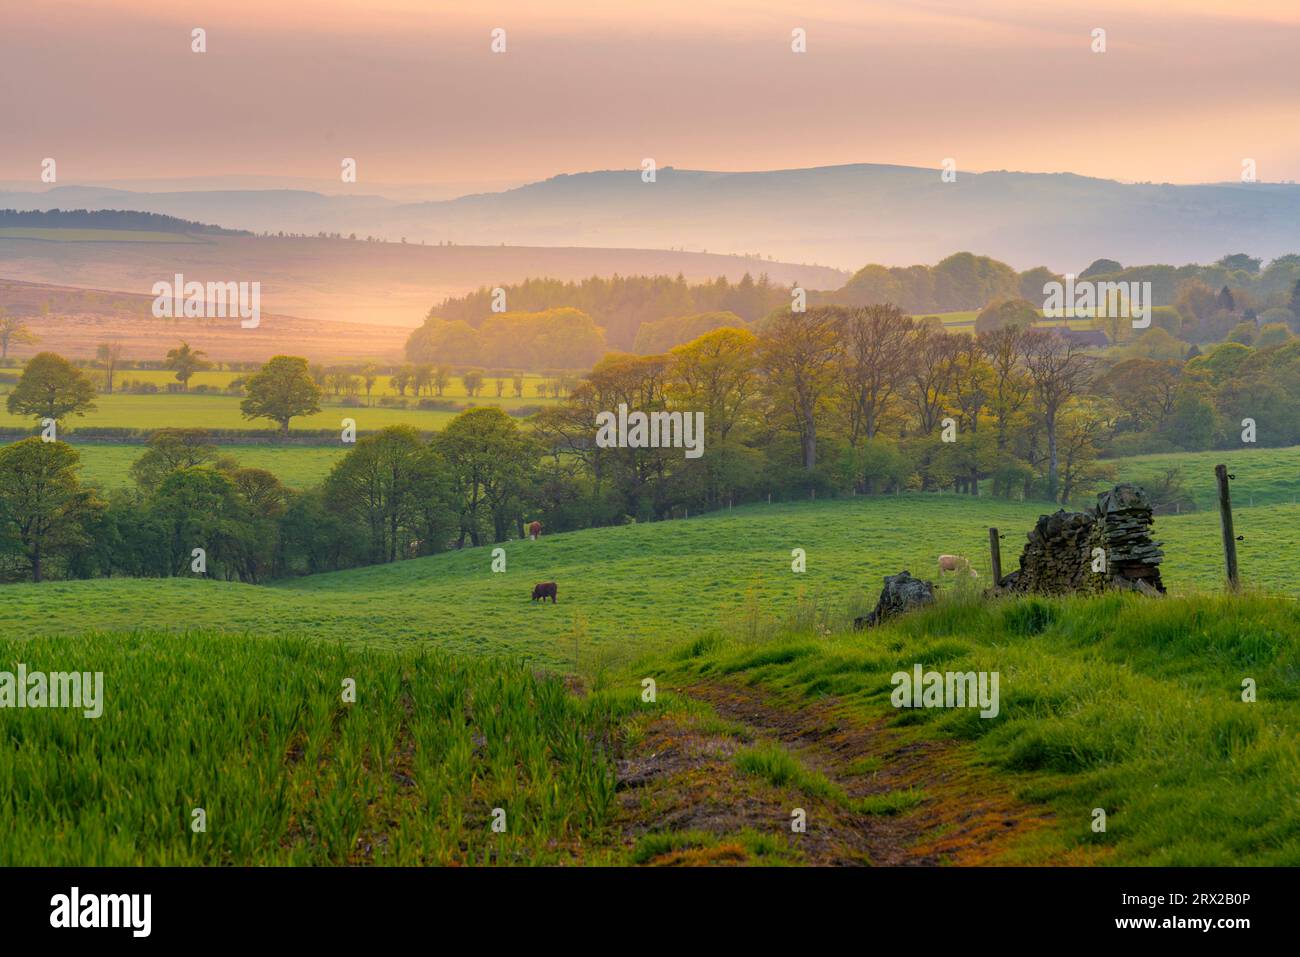 View of sunset from Wadshelf in the Peak District National Park, Derbyshire, England, United Kingdom, Europe Stock Photo